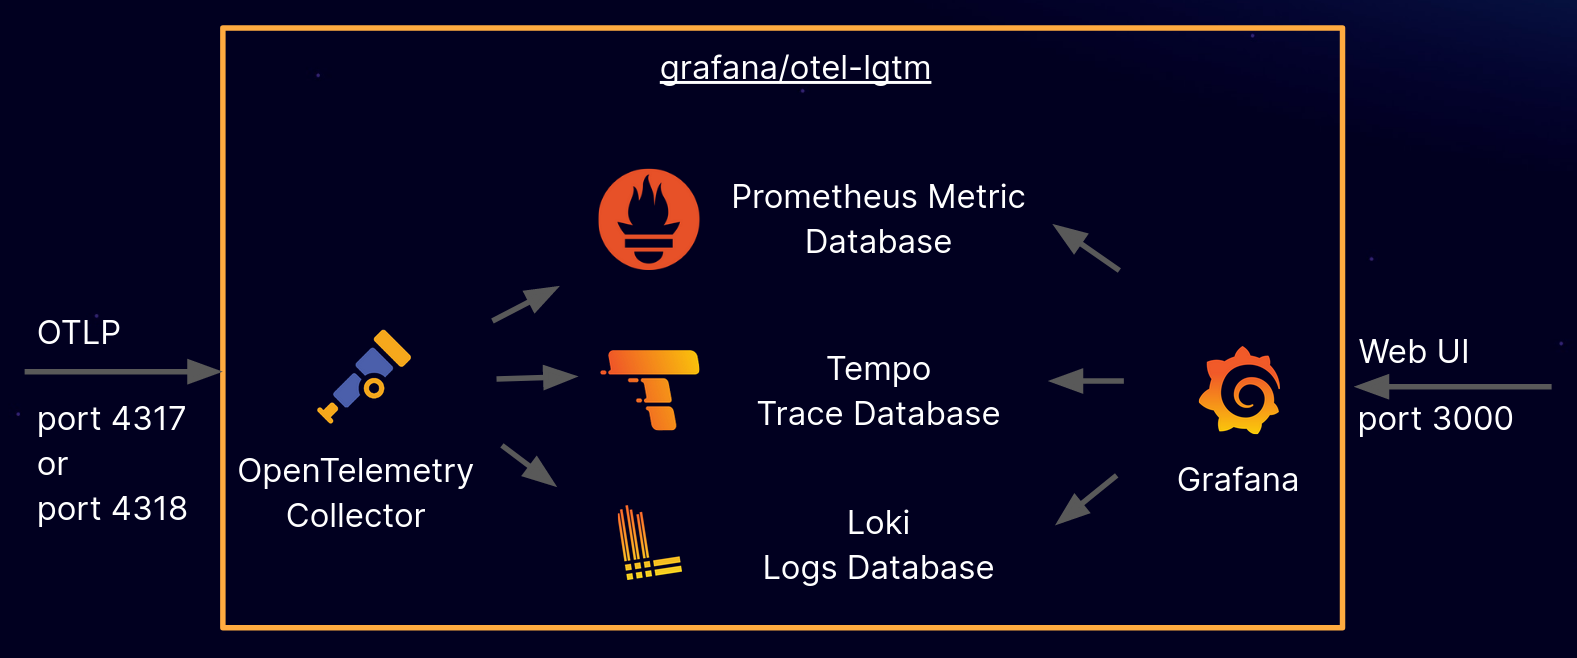 Components included in the Docker image: OpenTelemetry collector, Prometheus, Tempo, Loki, Grafana